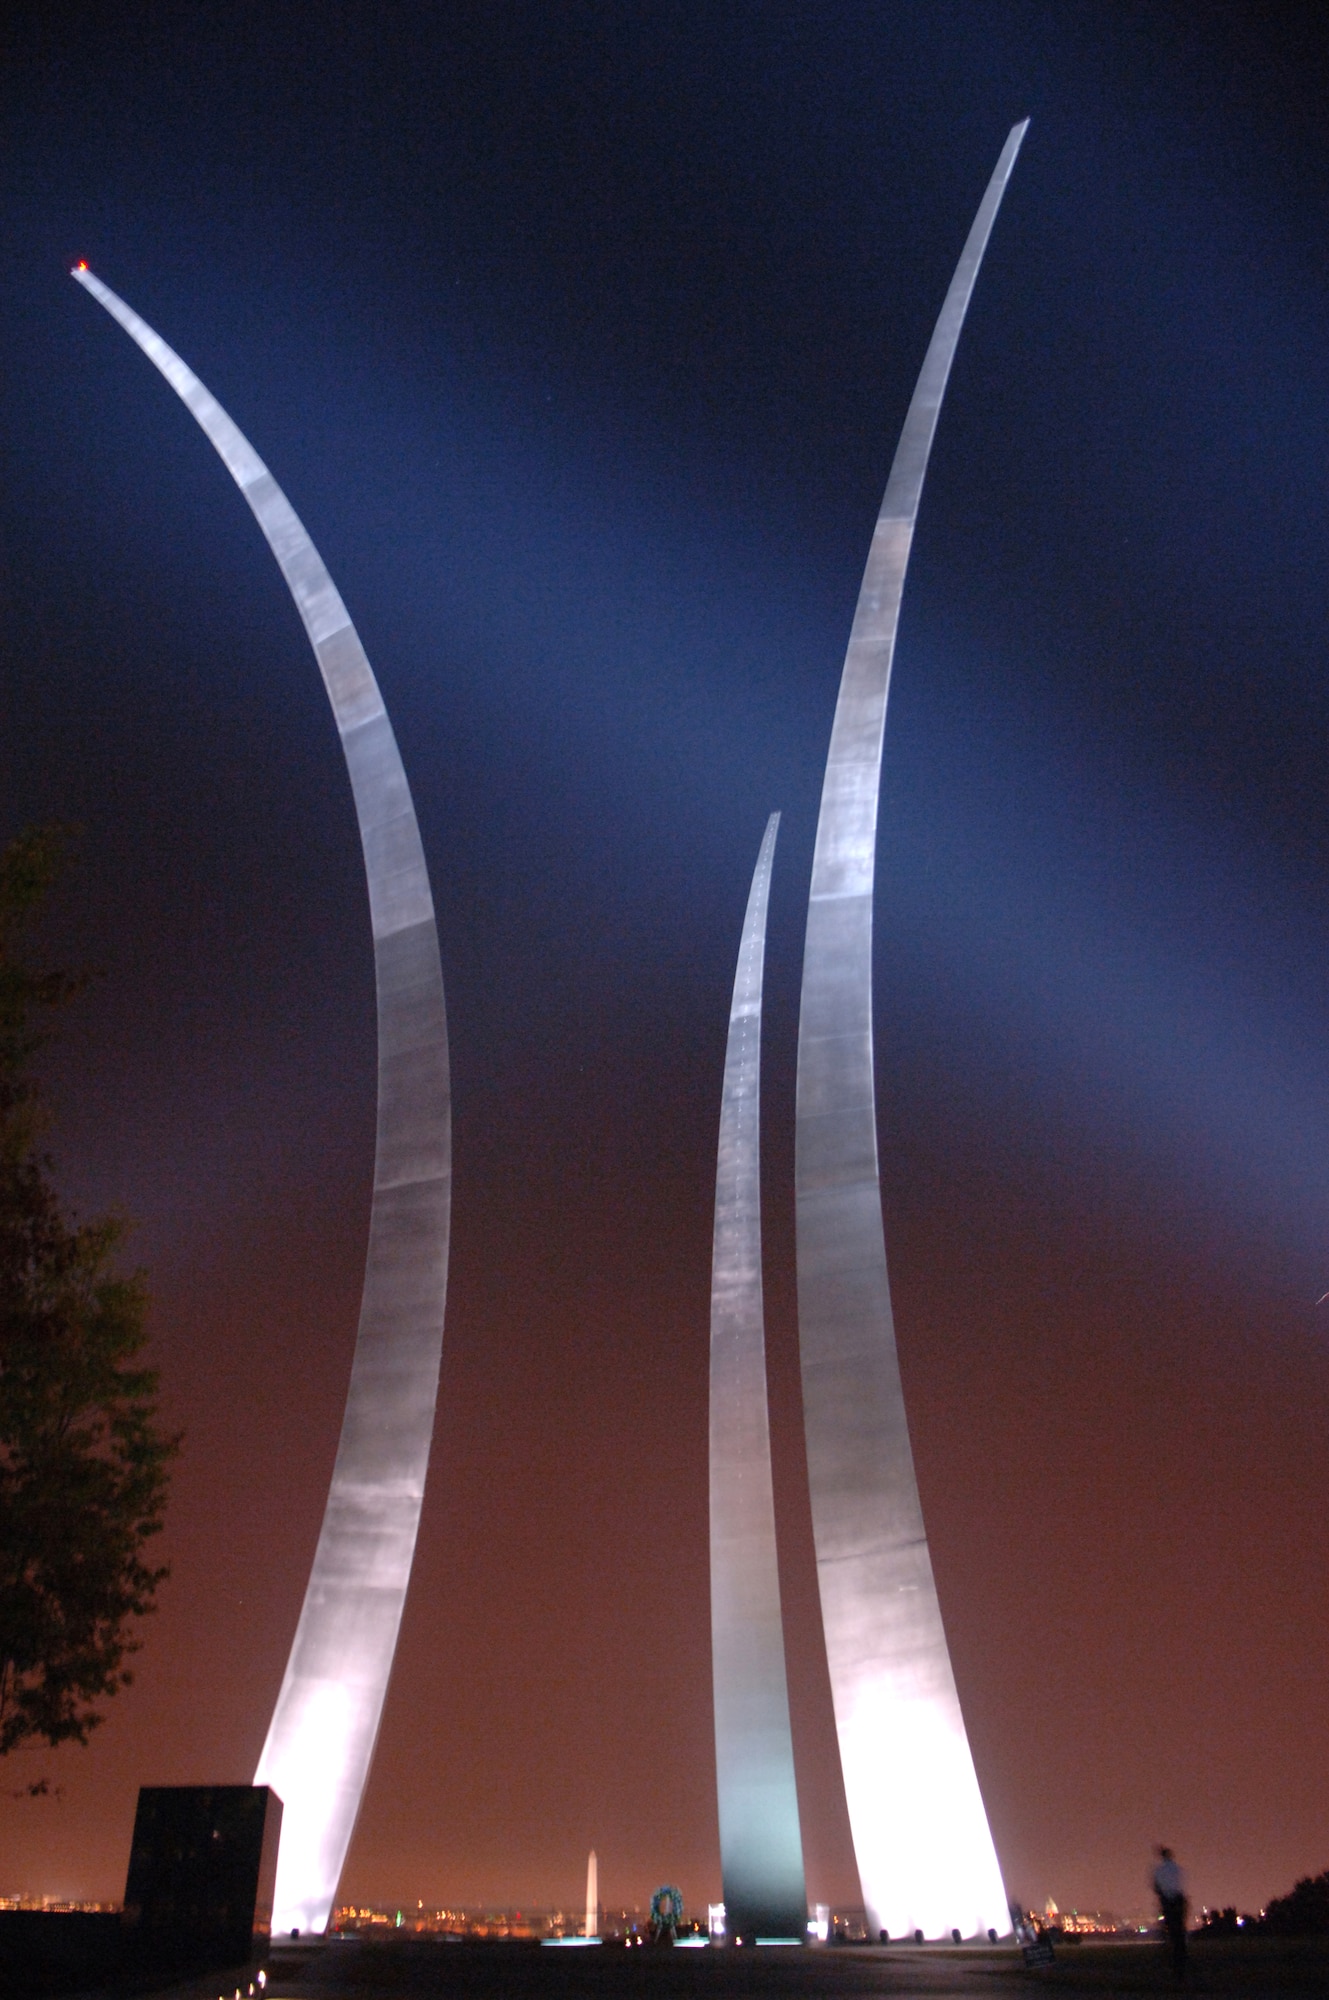 The Air Force Memorial spires soar toward the night sky, the lights of nearby Washington D.C. glowing in the background.  Designed by the late James Ingo Freed, the memorial pays tribute to and honors the patriotic men and women of the U.S. Air Force and its predecessor organizations.  (U.S. Air Force photo/Tech. Sgt. Christopher J. Matthews)